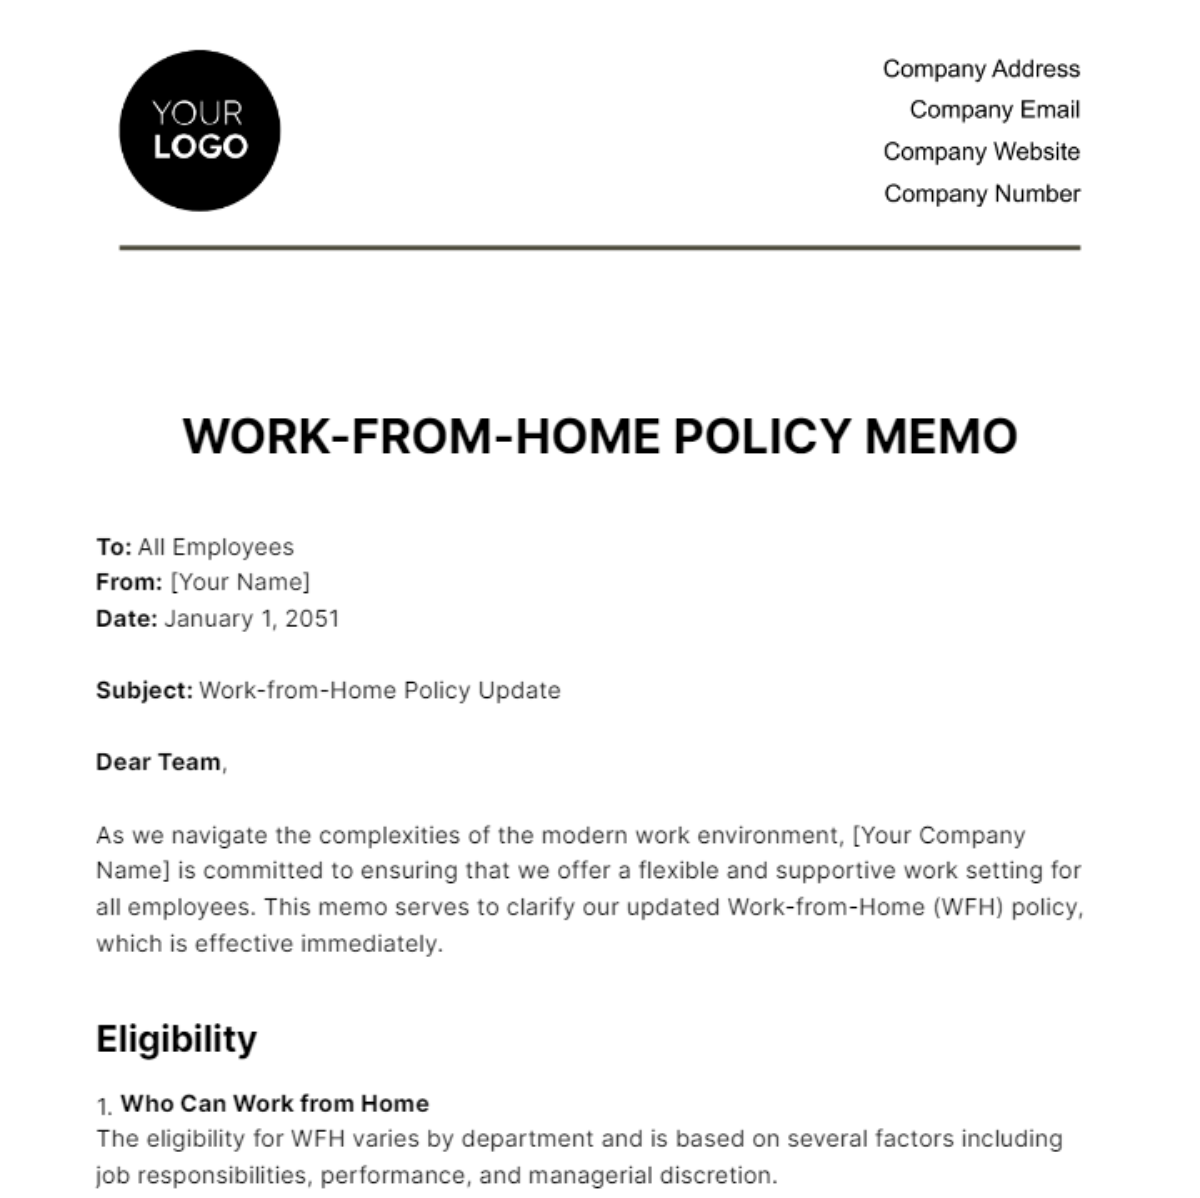 Free Work-from-Home Policy Memo HR Template